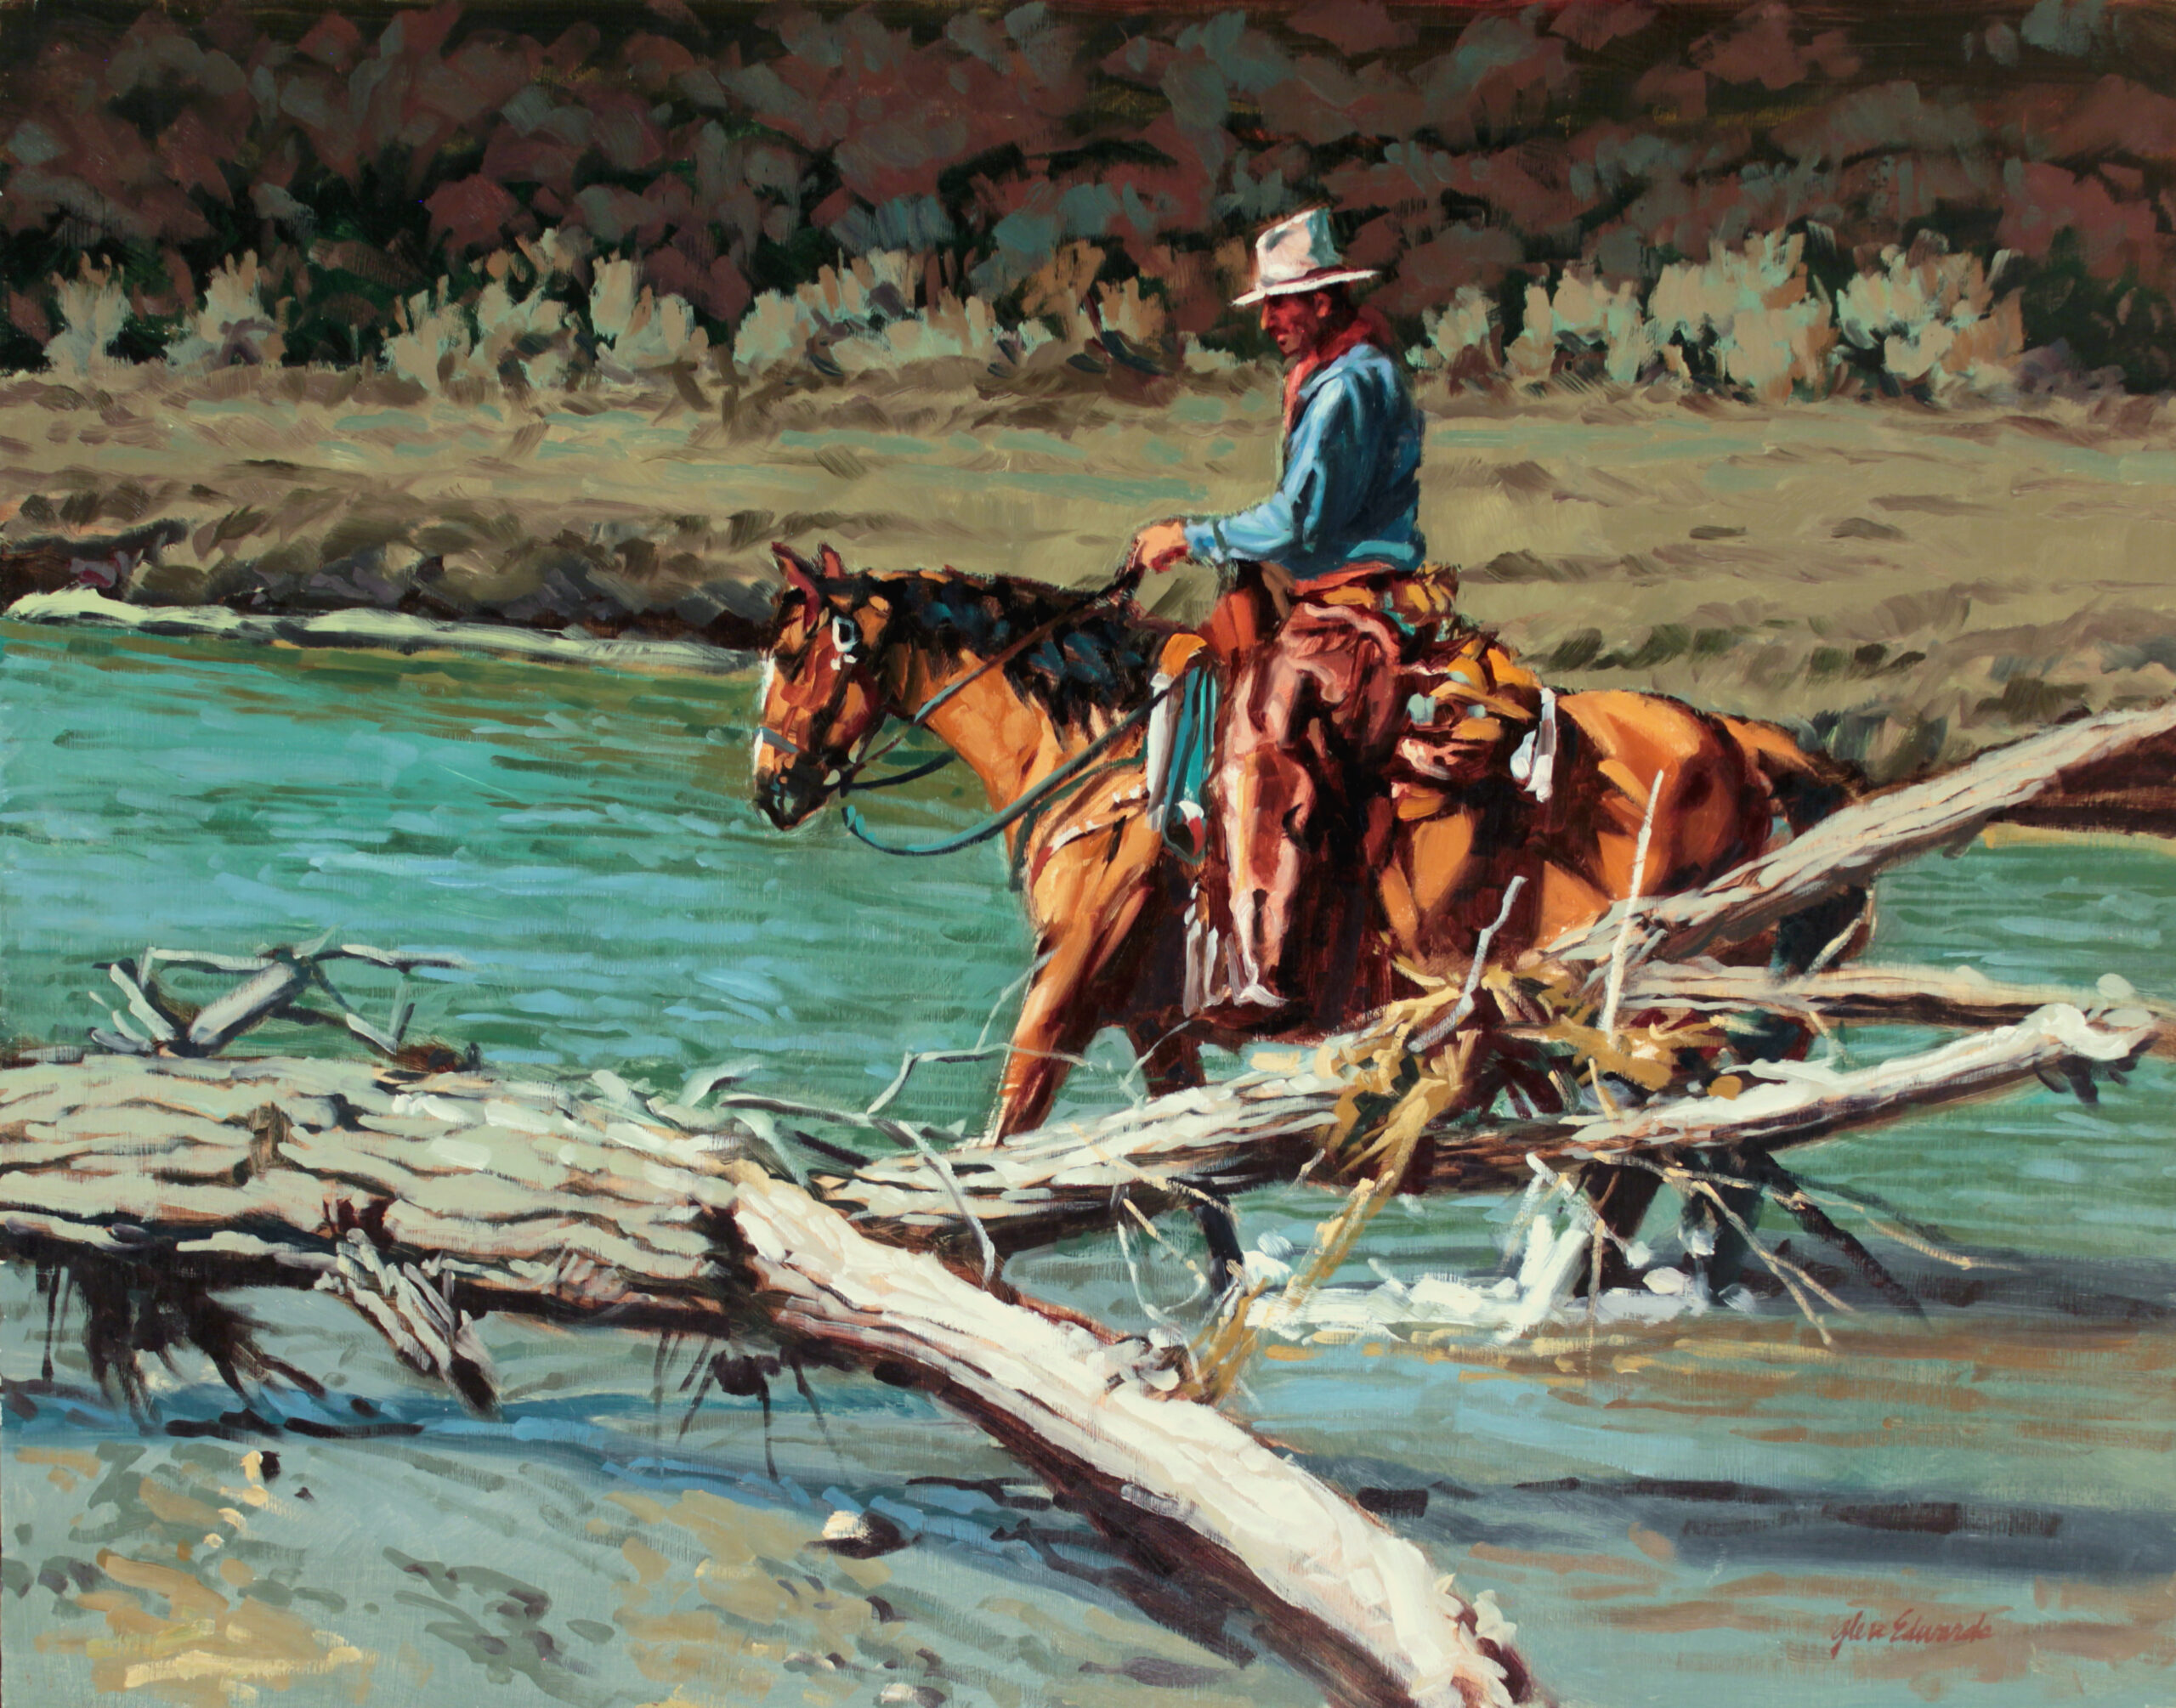 painting of a coyboy riding his horse in a stream, with a deadfallen tree in the foreground